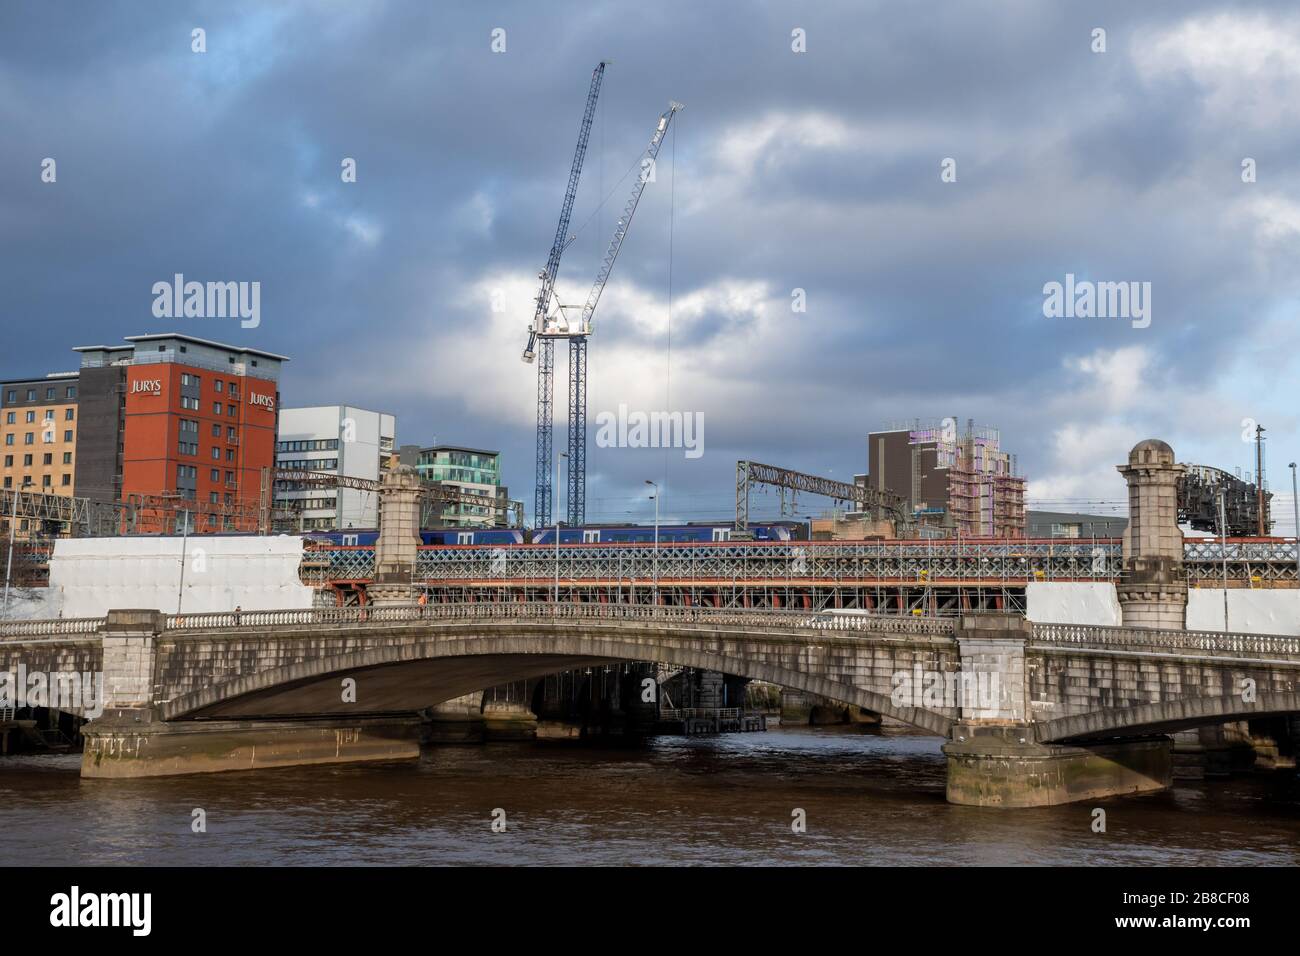 King George V Bridge and Central Station Railway Bridge with two tower cranes in the background shining in the sun Stock Photo